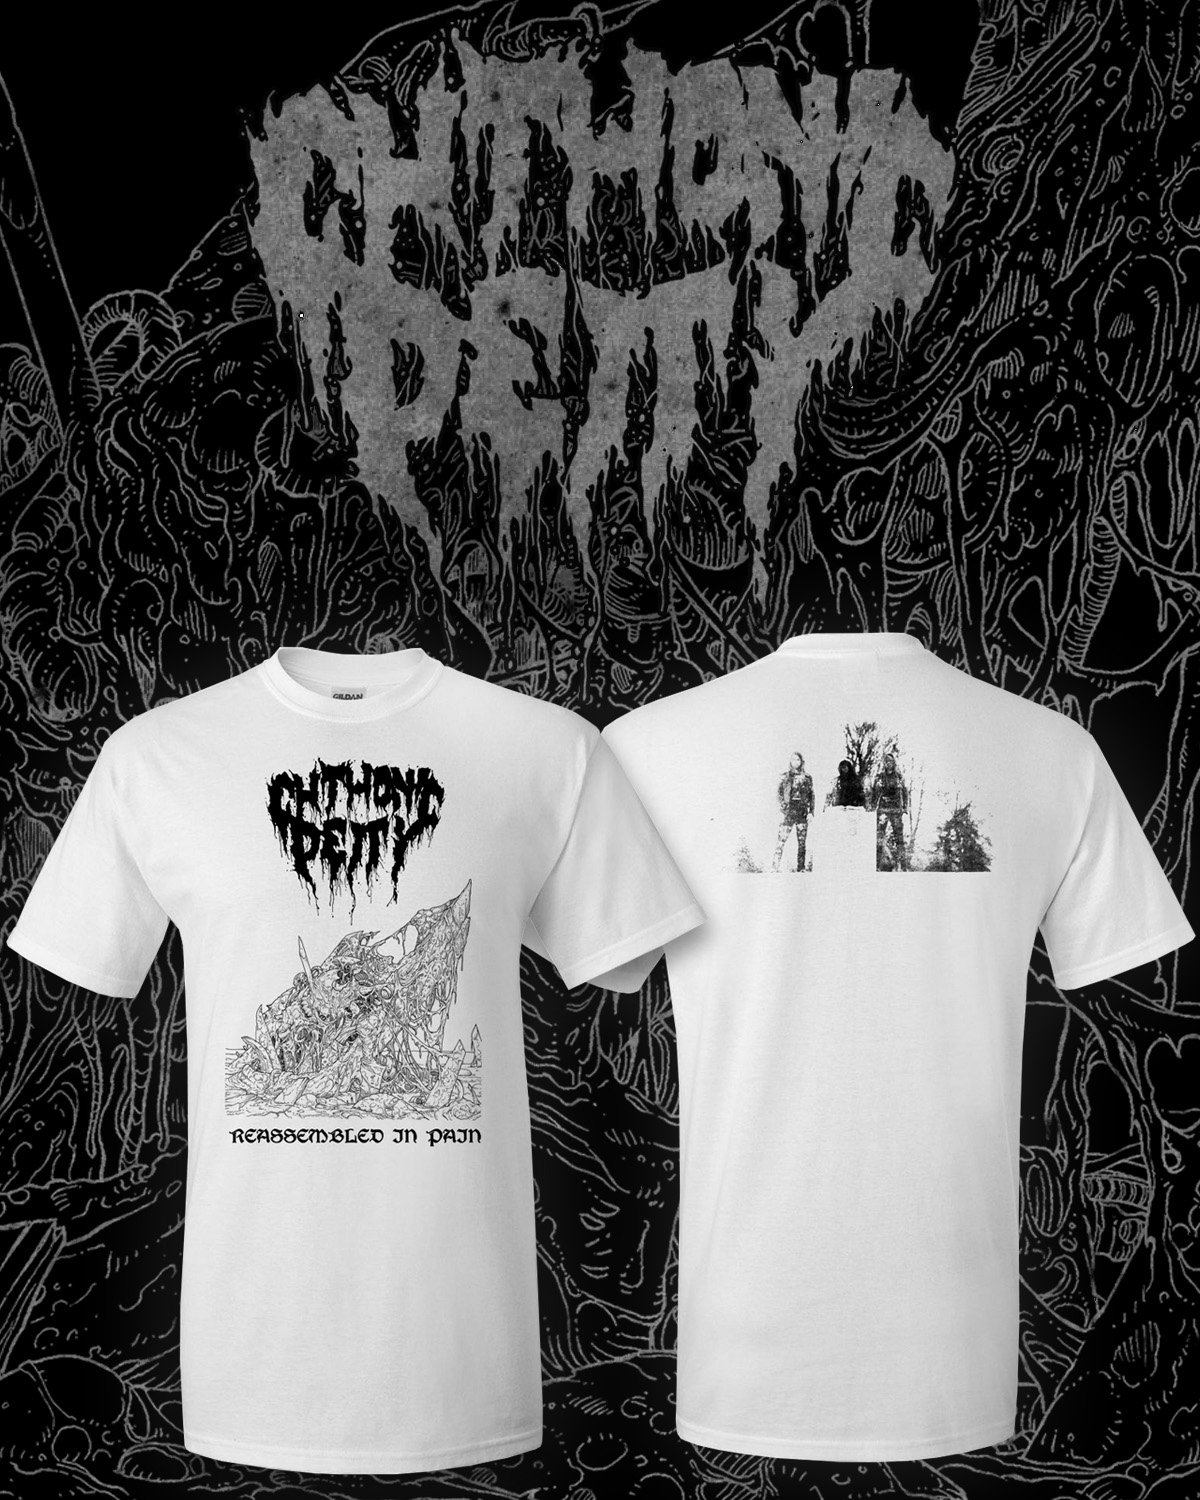 Image of CHTHONIC DEITY "Reassembled In Pain" WHITE Shirt